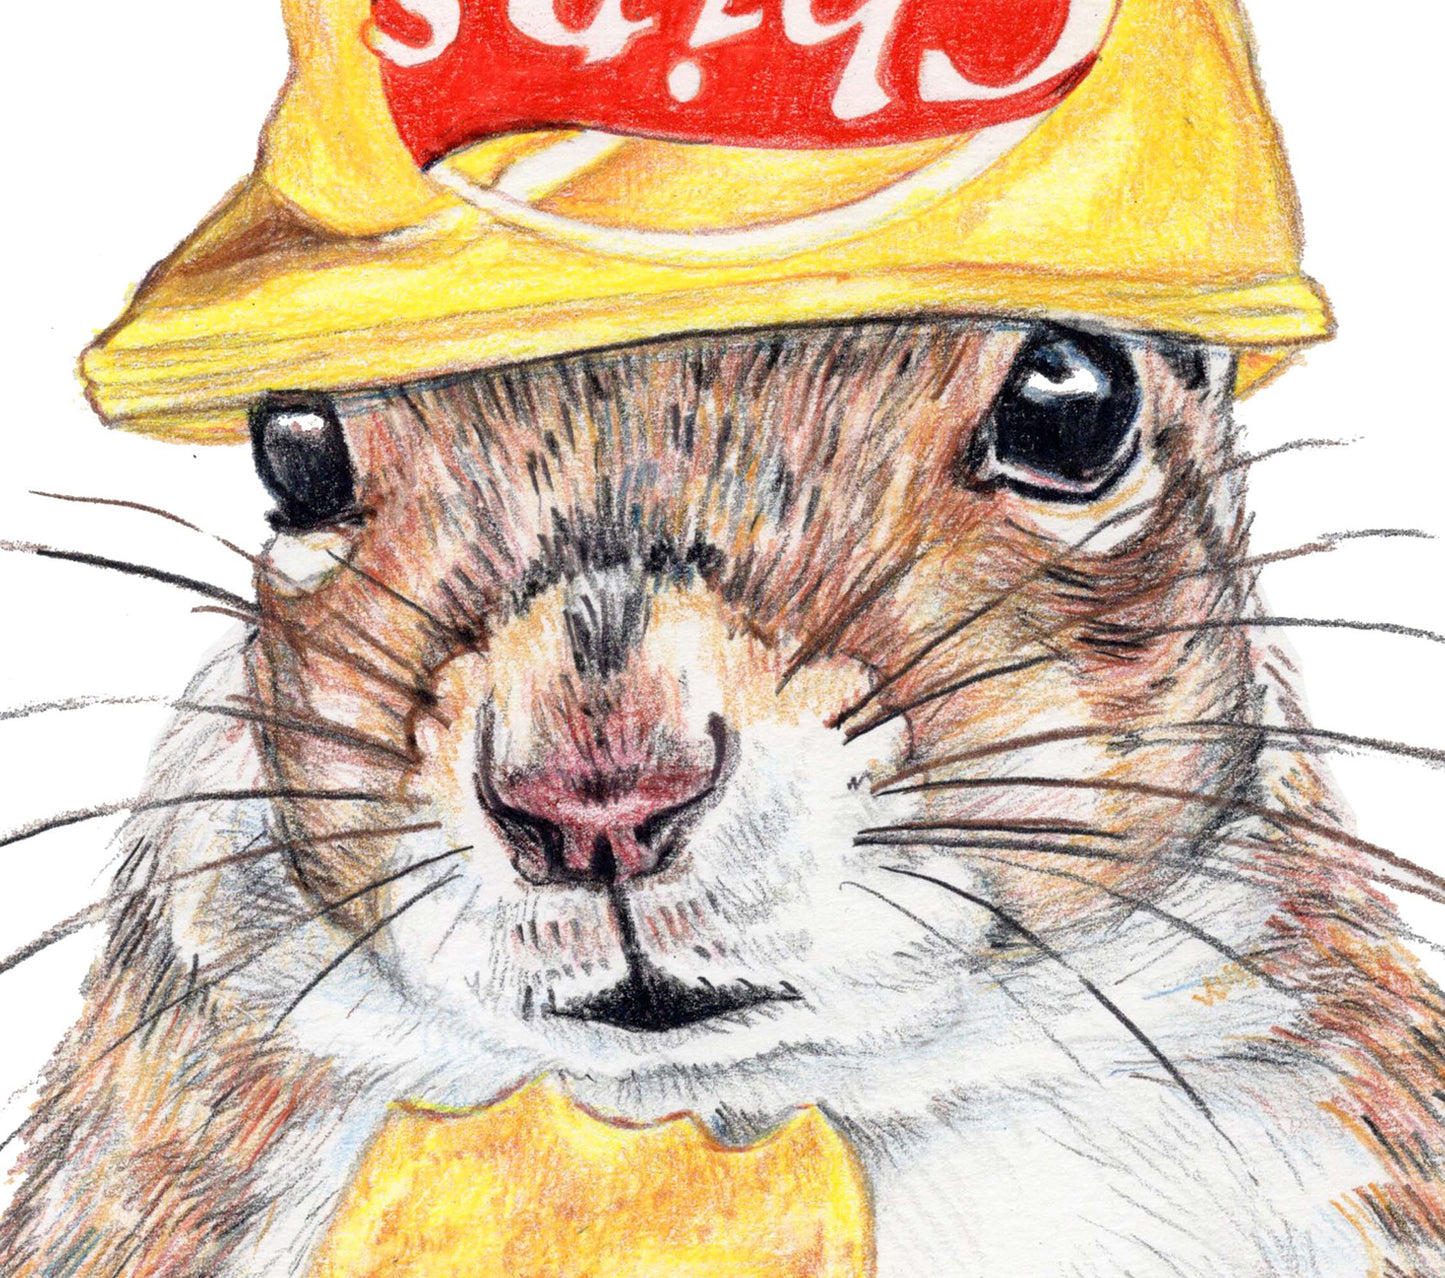 Coloured pencil drawing of a squirrel wearing a bright yellow potato chip bag on it's head. Art by Deidre Wicks